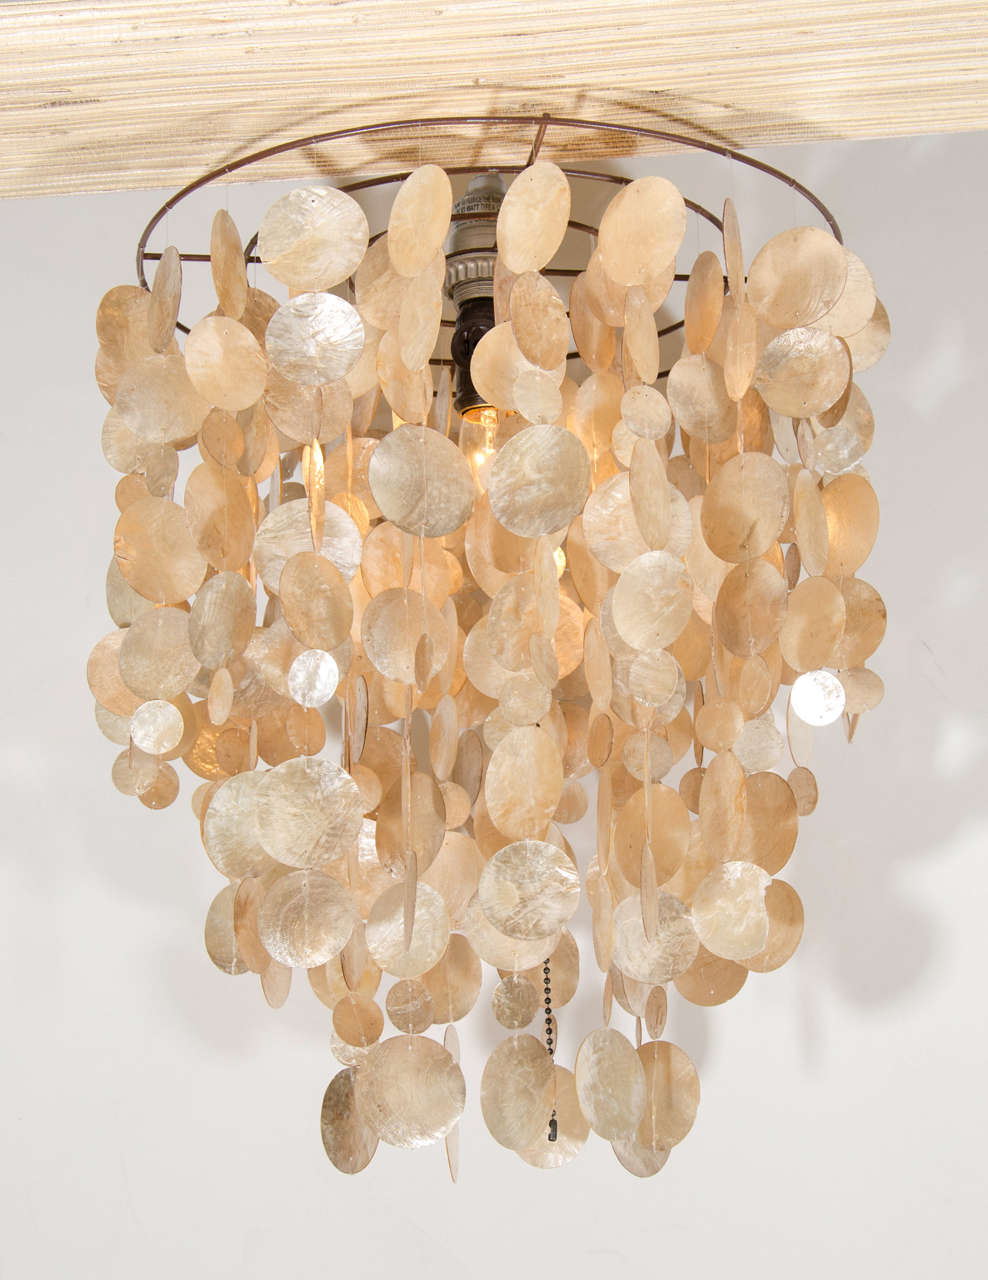 A vintage iridescent capiz shell chandelier with descending concentric circles.

Good vintage condition with age appropriate wear. Several shells are chipped.